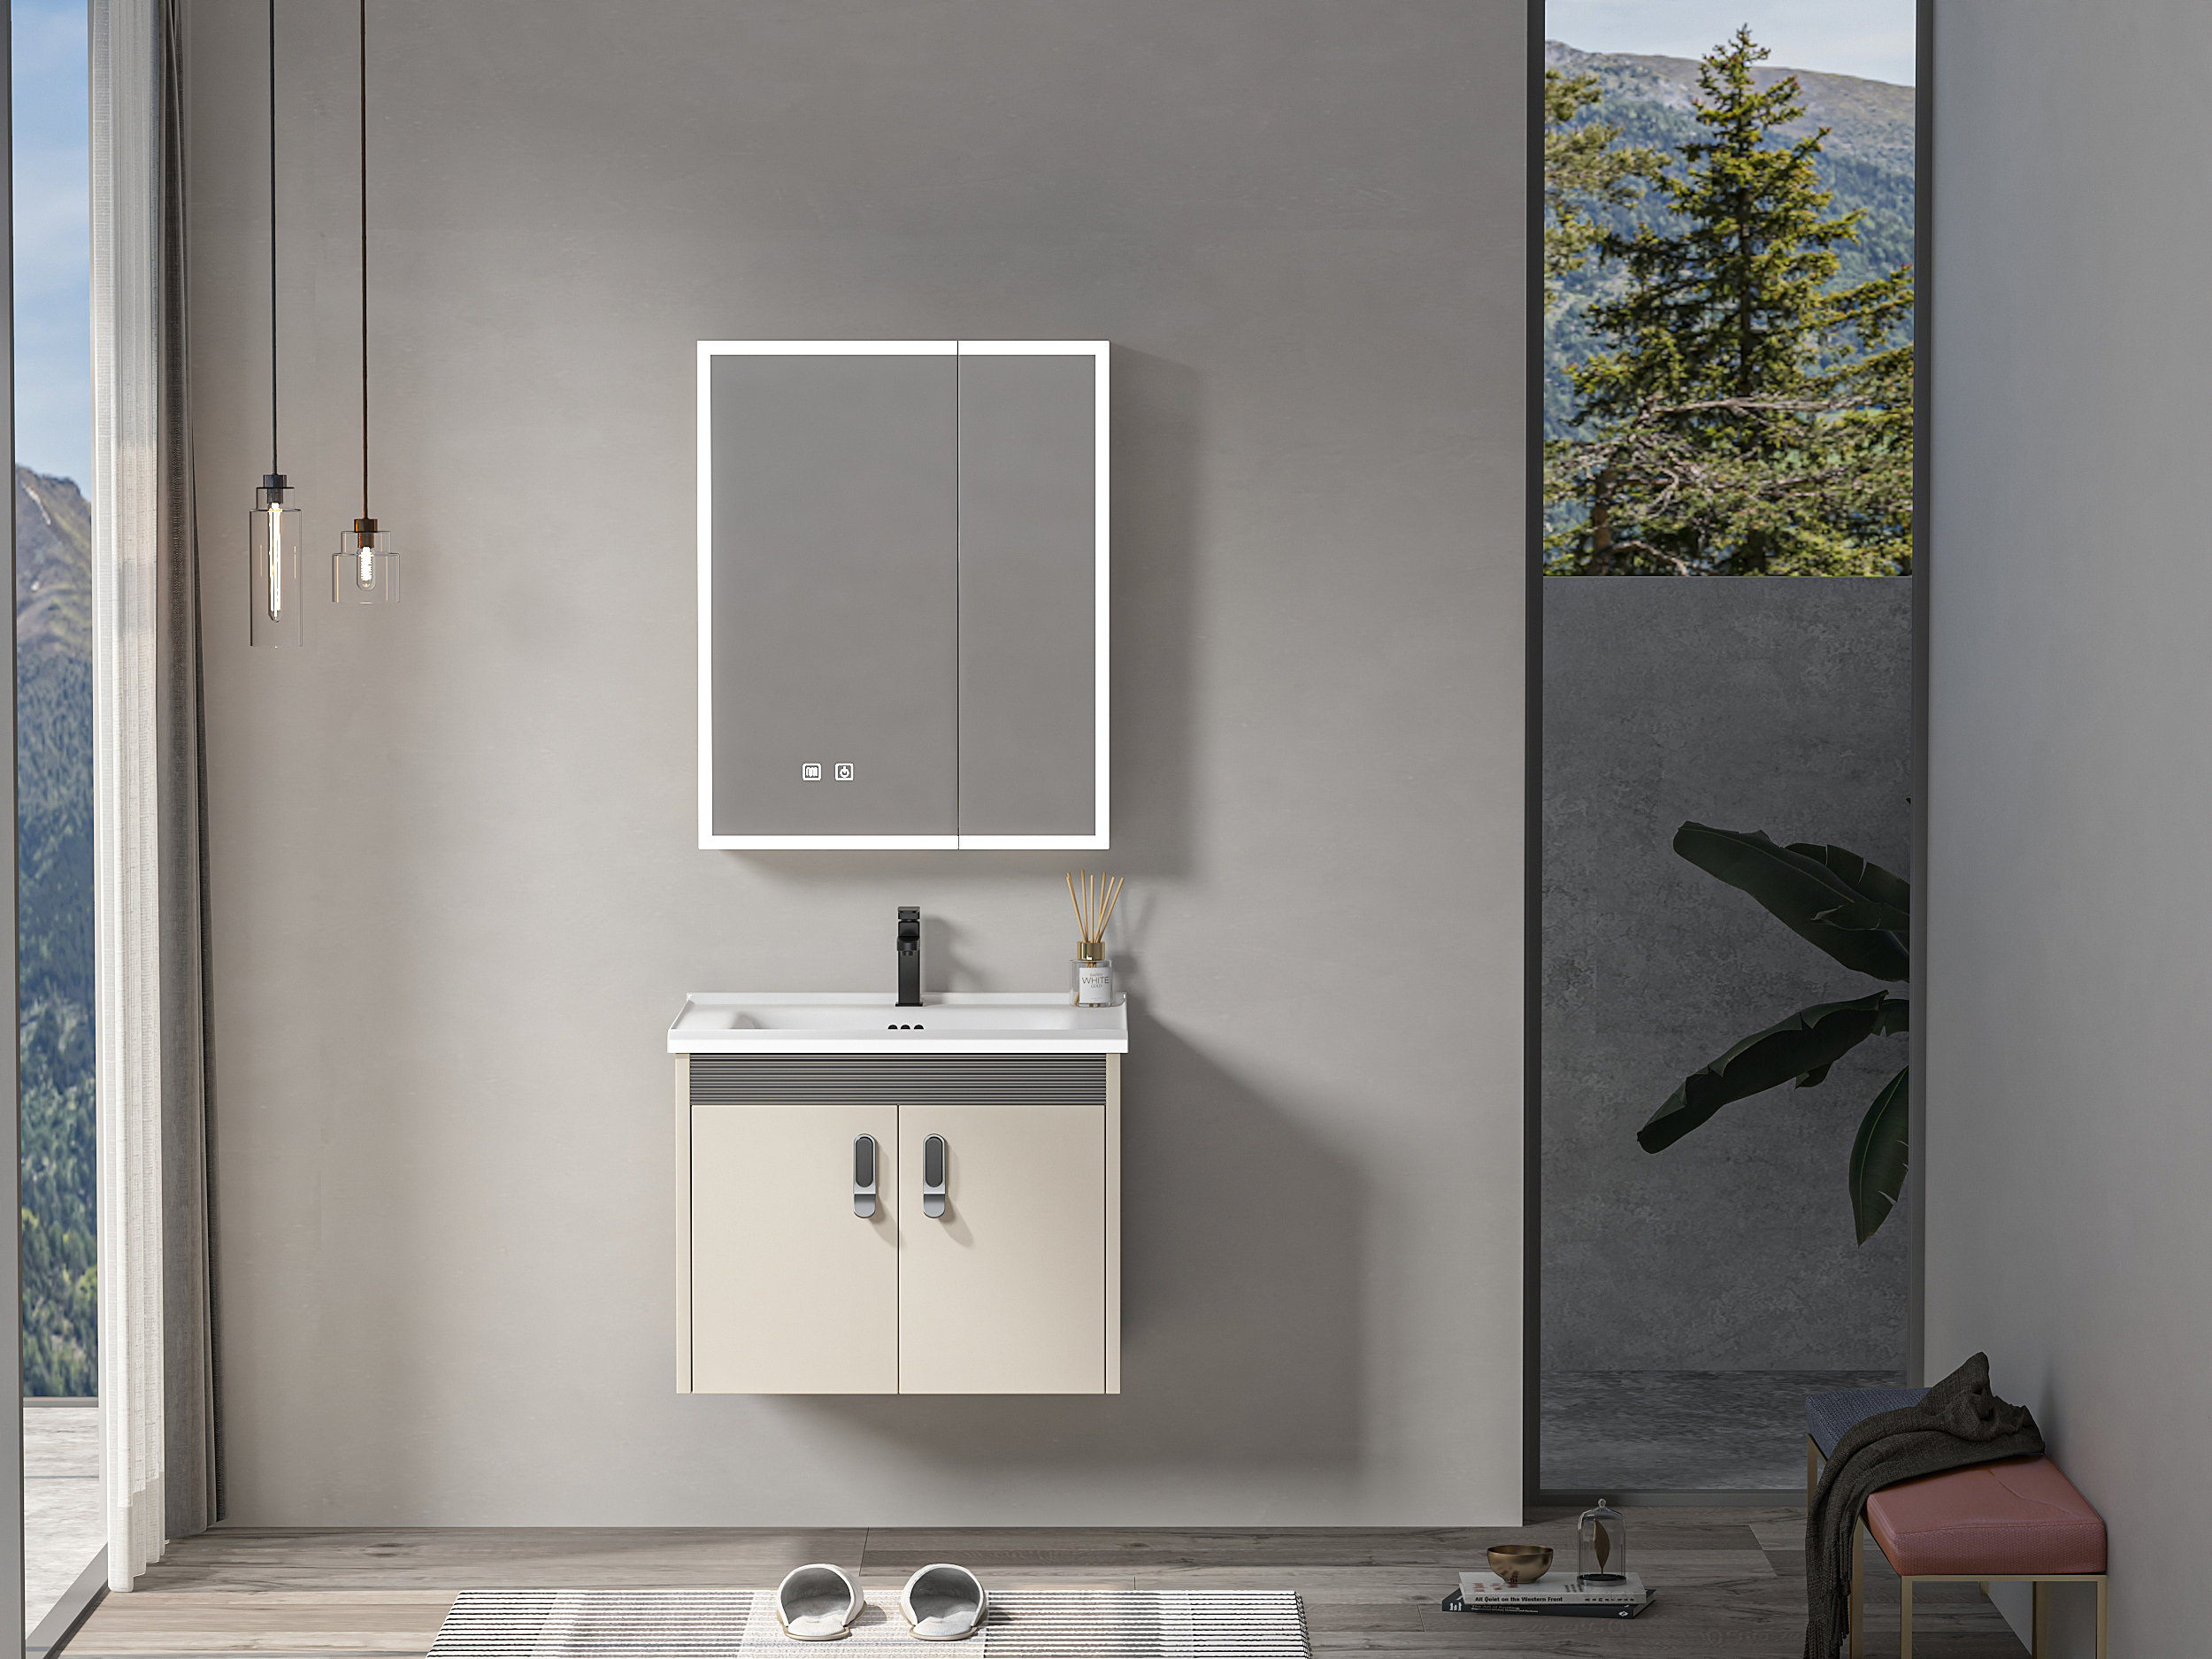 Aigao boutique stainless steel bathroom cabinet BX01 series